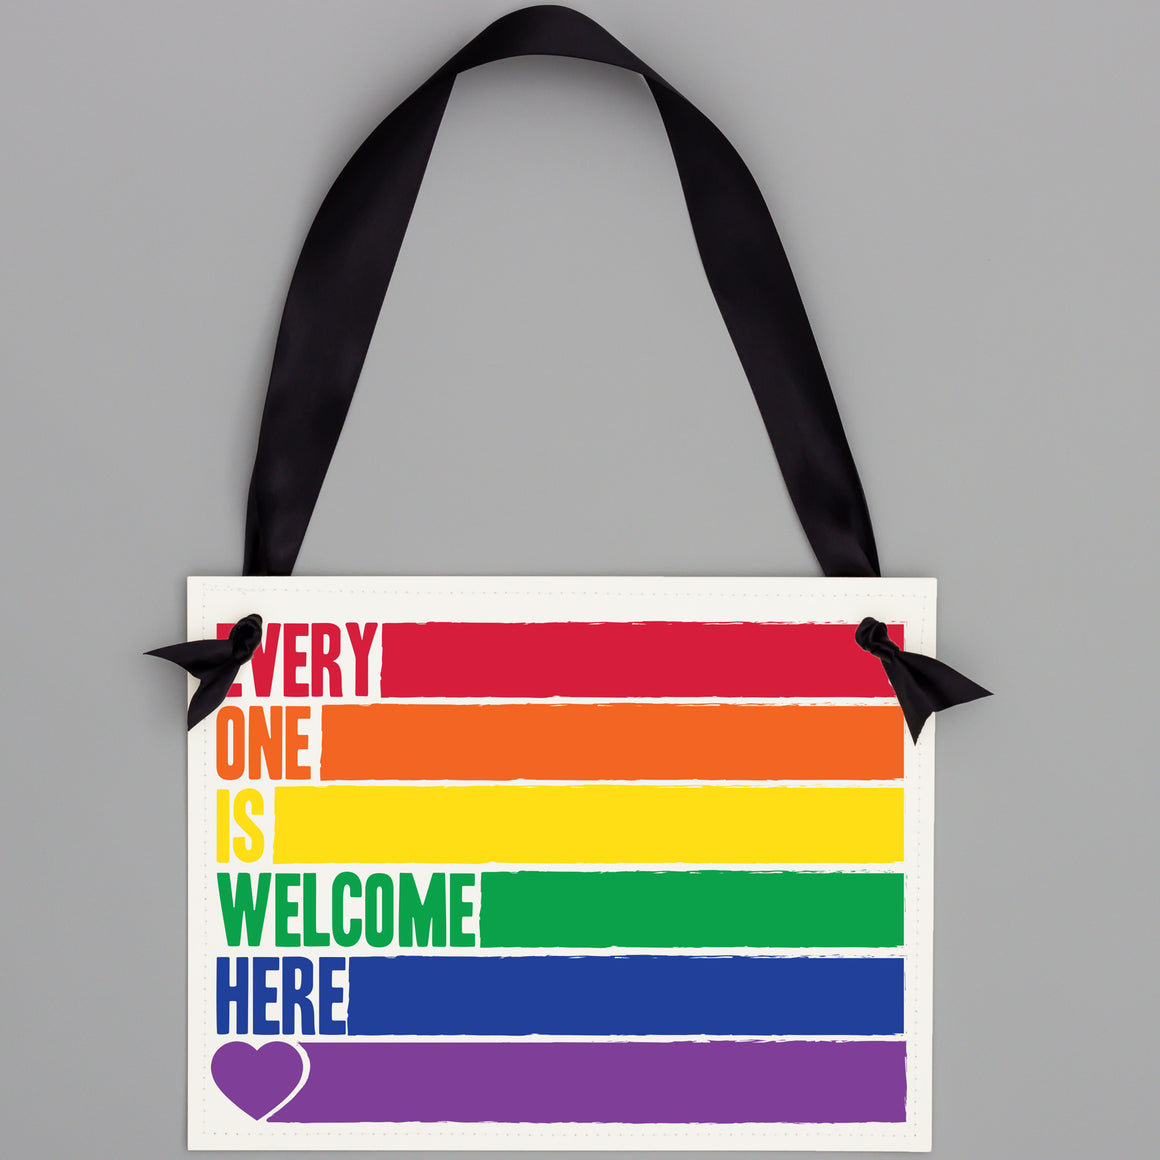 Everyone Is Welcome Here Wall Hanging Banner